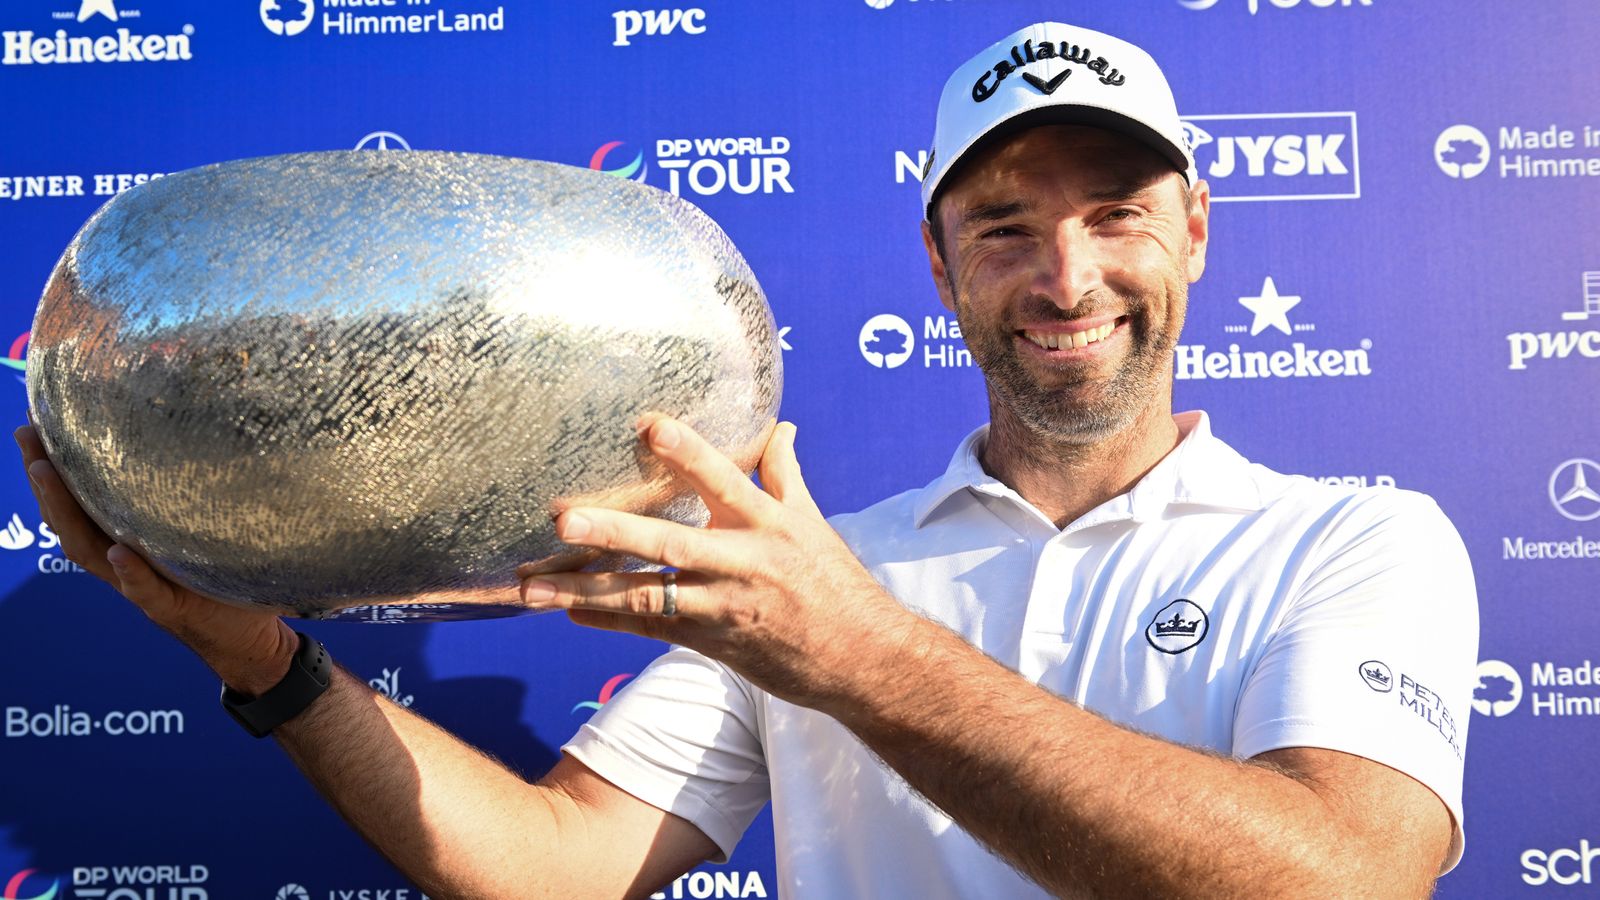 Made in HimmerLand: Oliver Wilson claims first DP World Tour title since 2014 with one-shot win